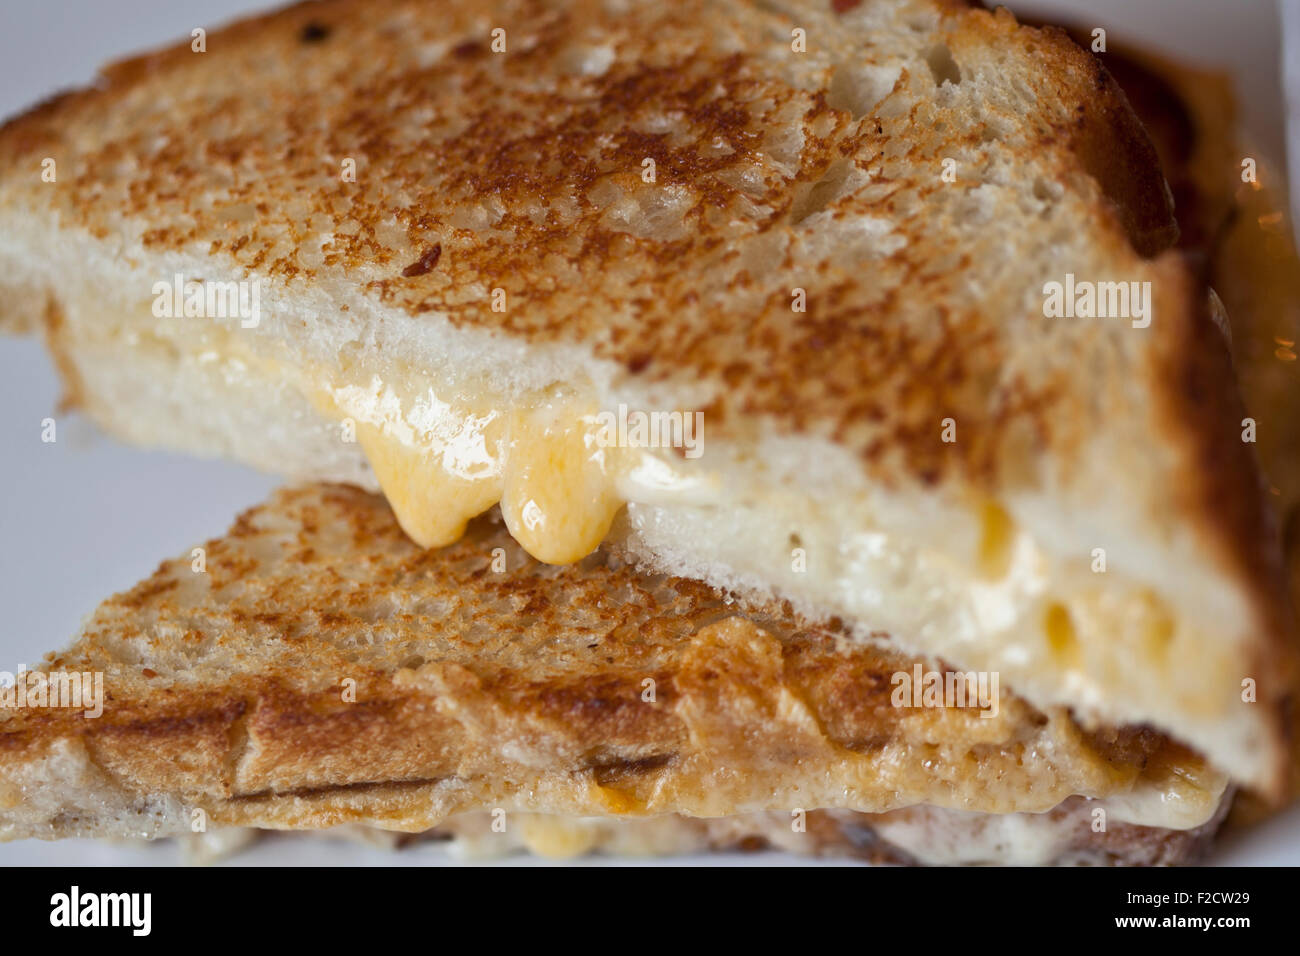 Close-up of grilled cheese sandwich with cheese oozing out. Stock Photo